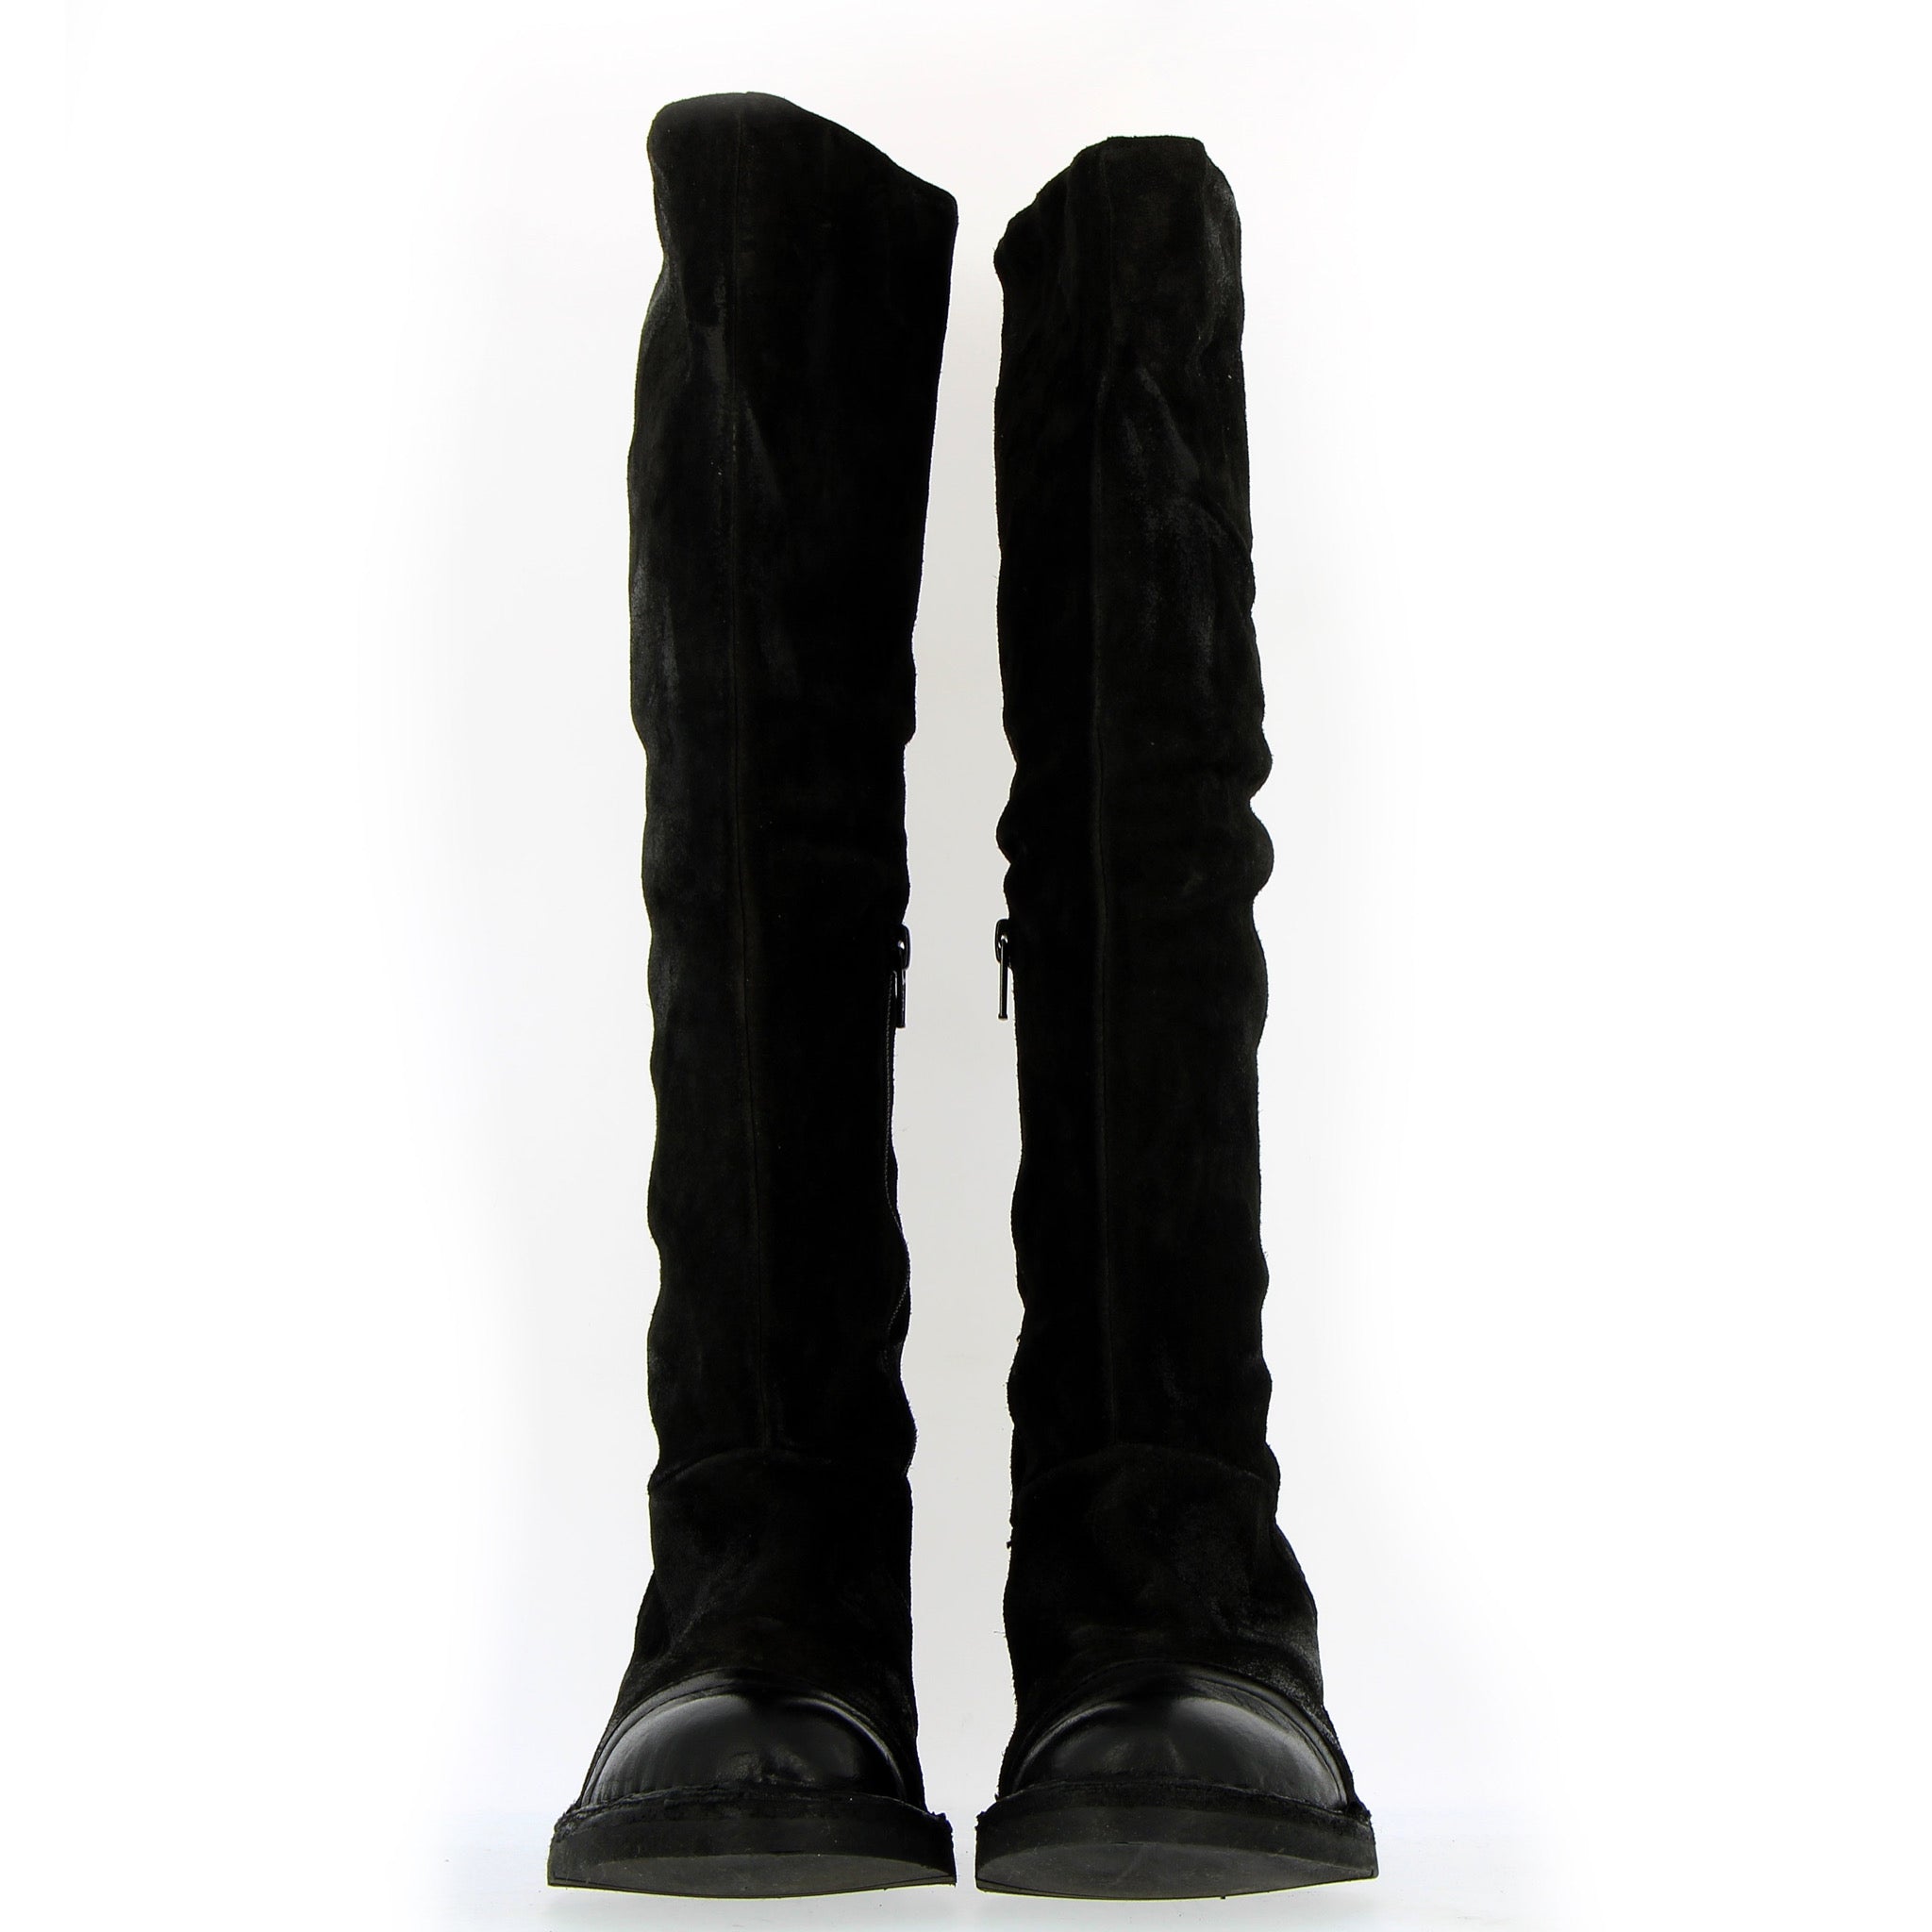 Boot in soft black suede with leather toe